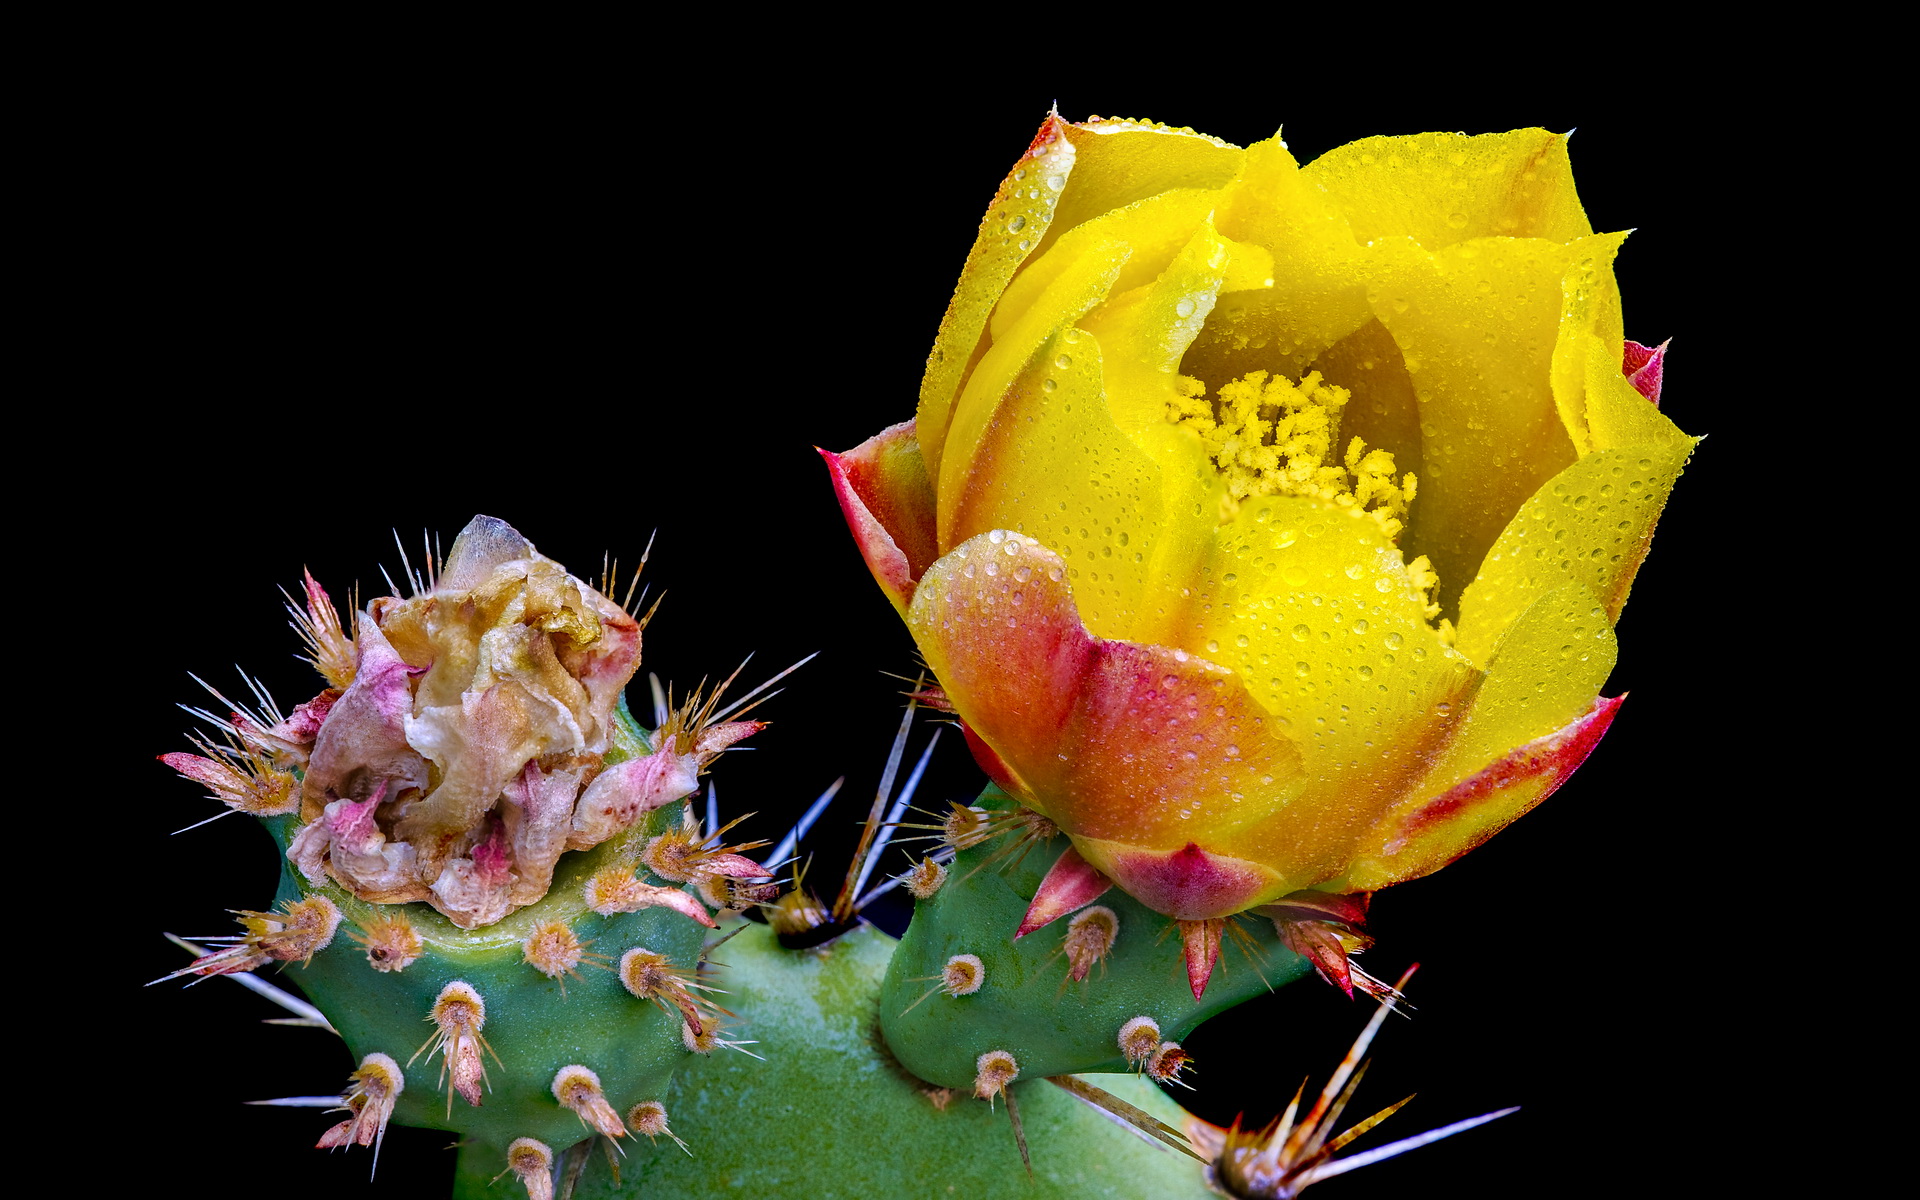 Prickly Pear Cactus Blossom (Opuntia ficus-indica) by Doug Meek